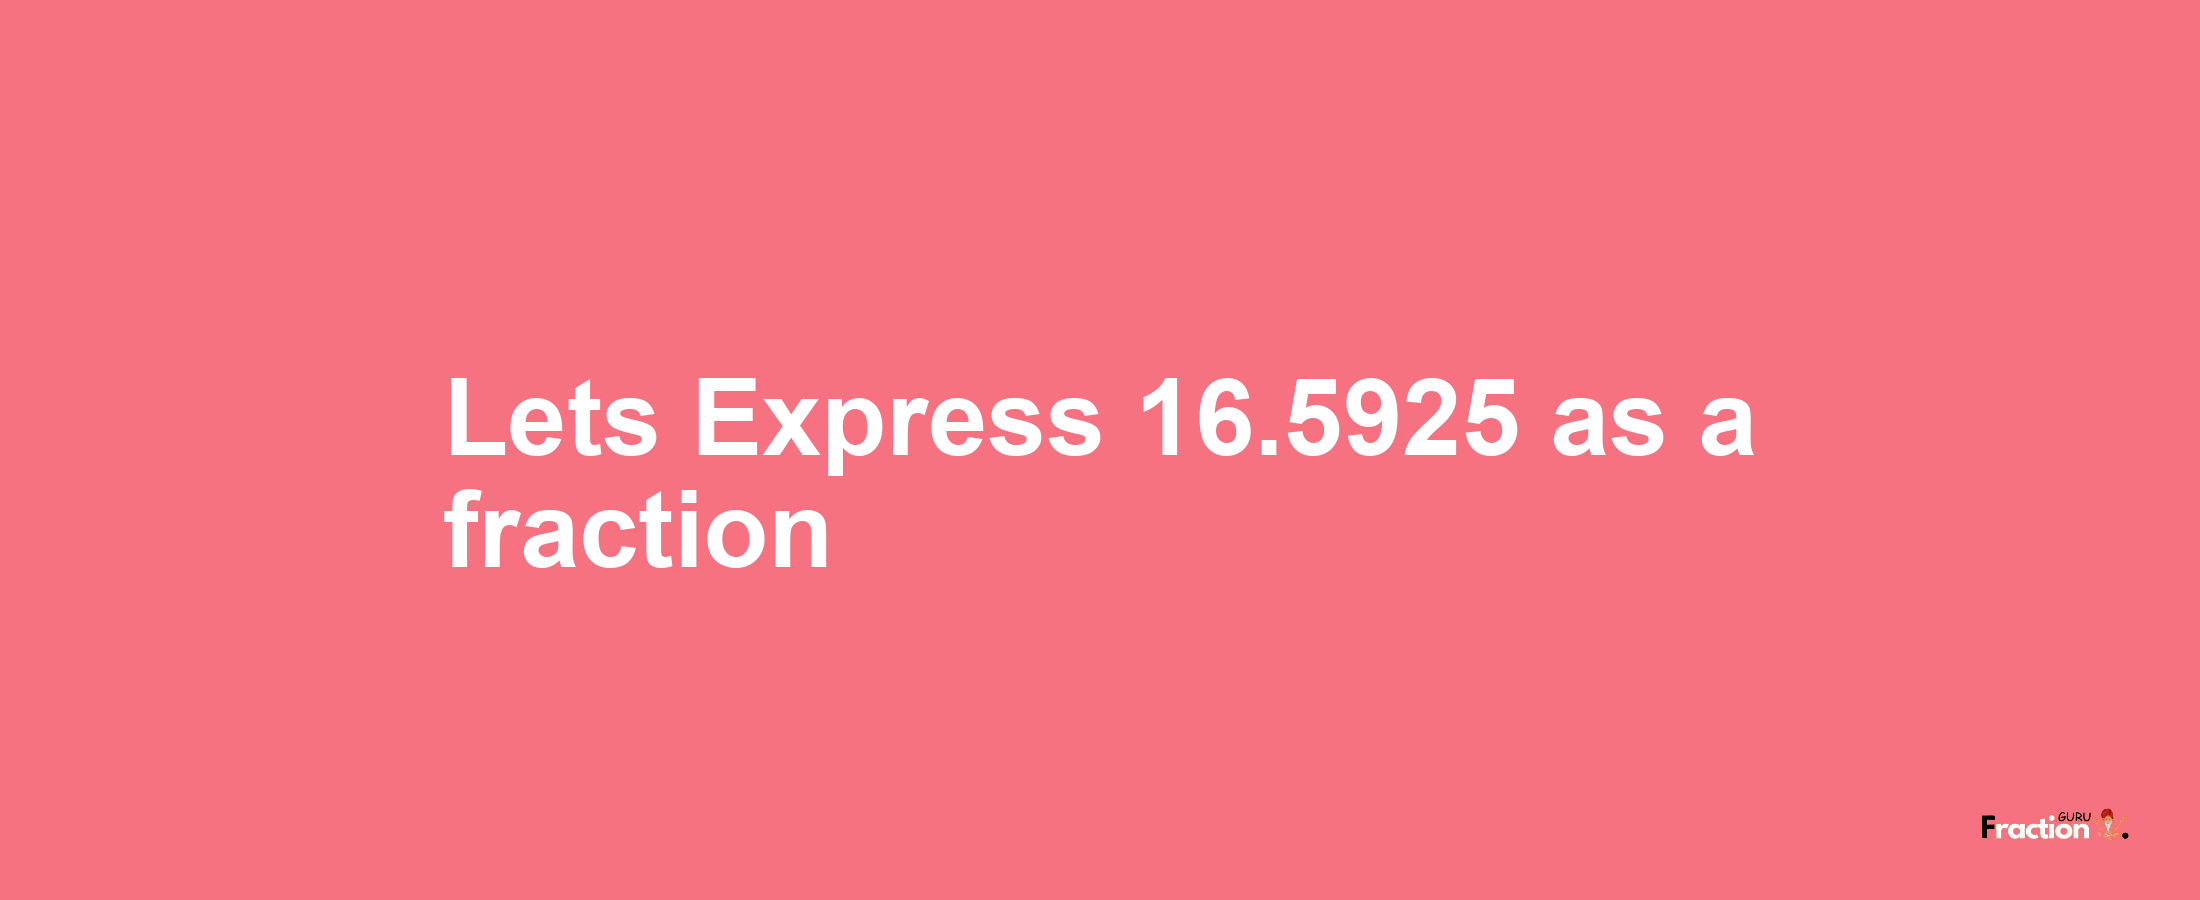 Lets Express 16.5925 as afraction